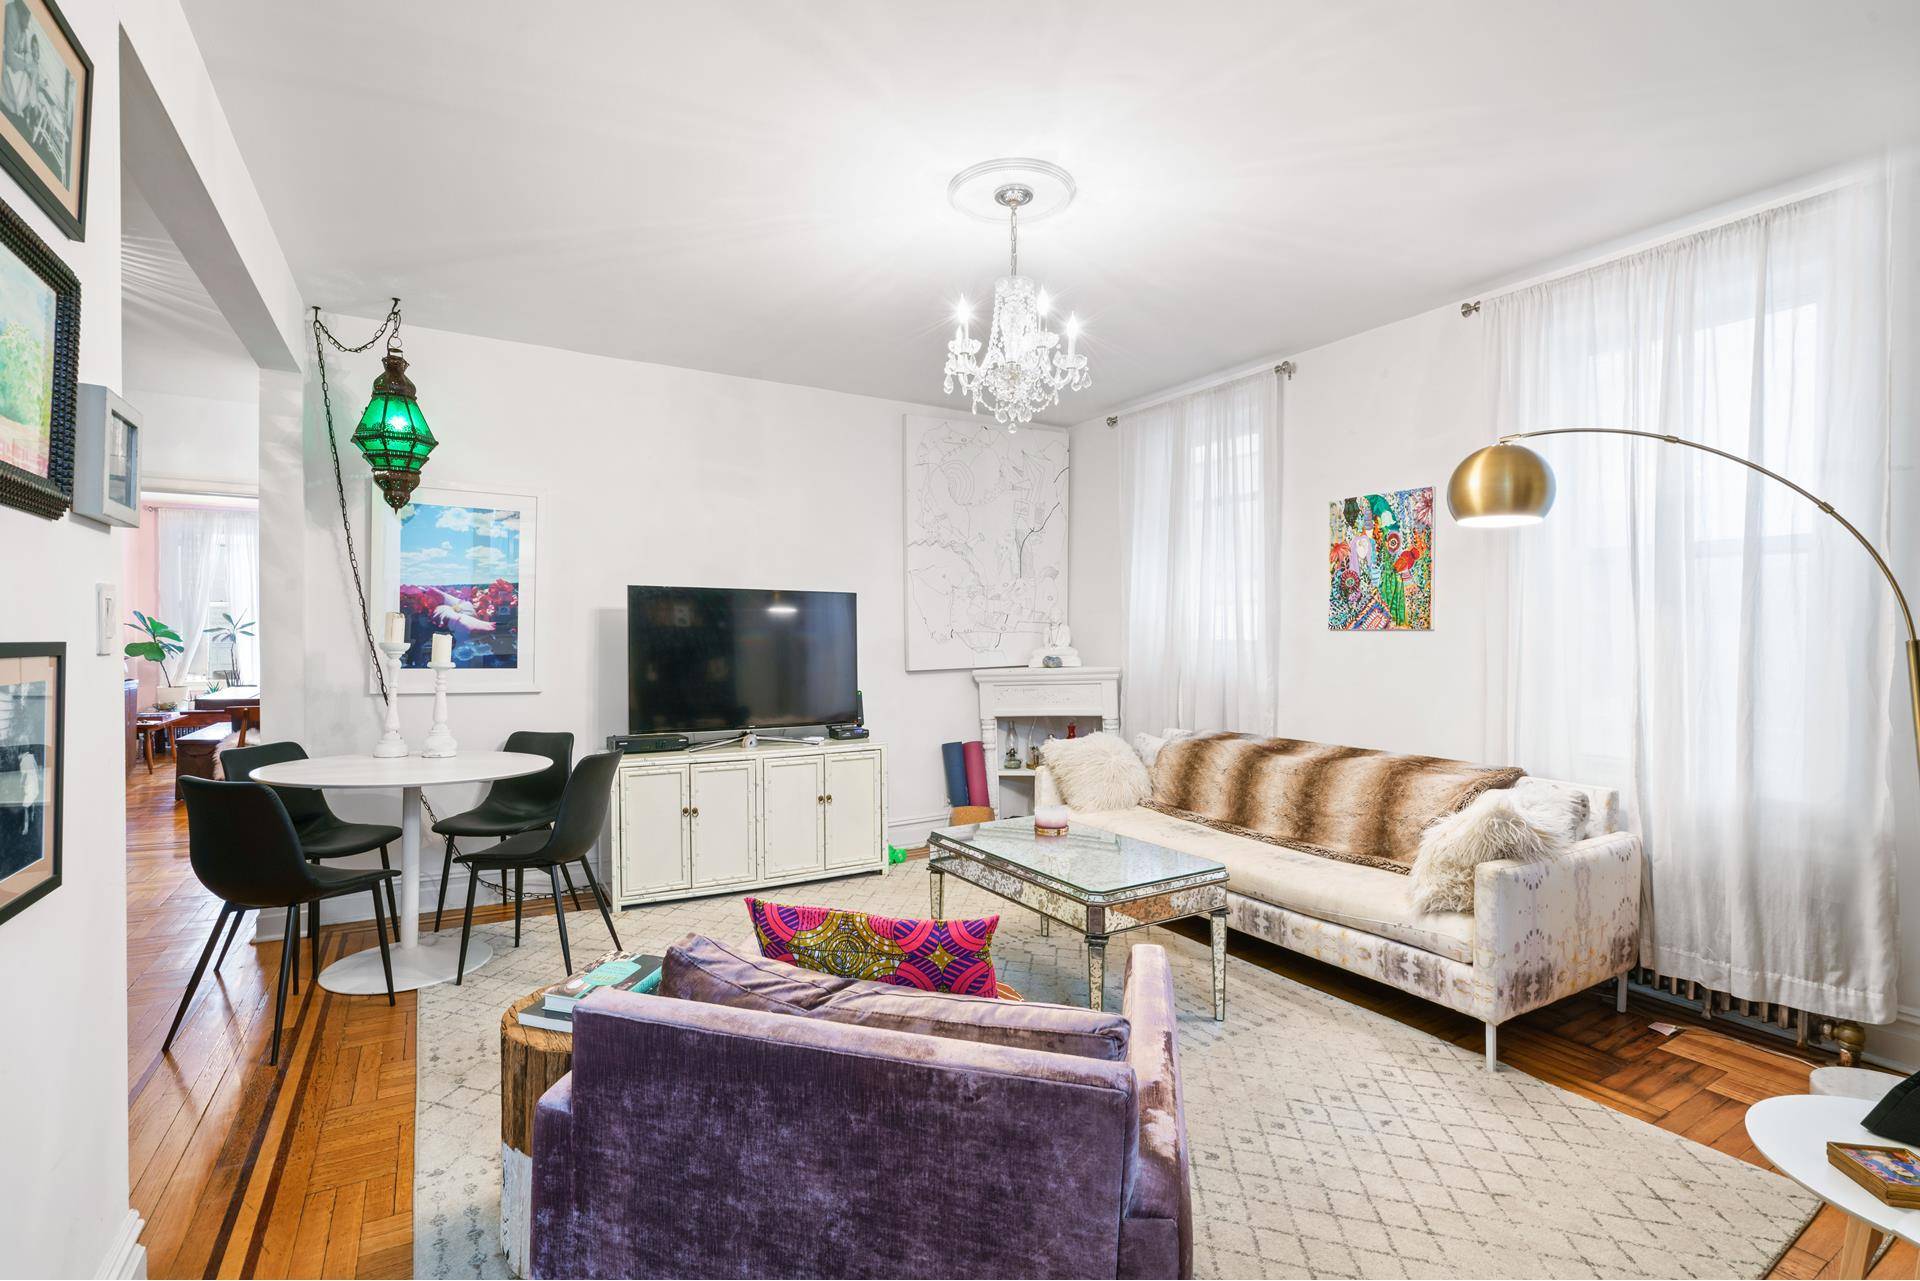 Airy two bedrooms with blend of traditional prewar details mixed with art mode.